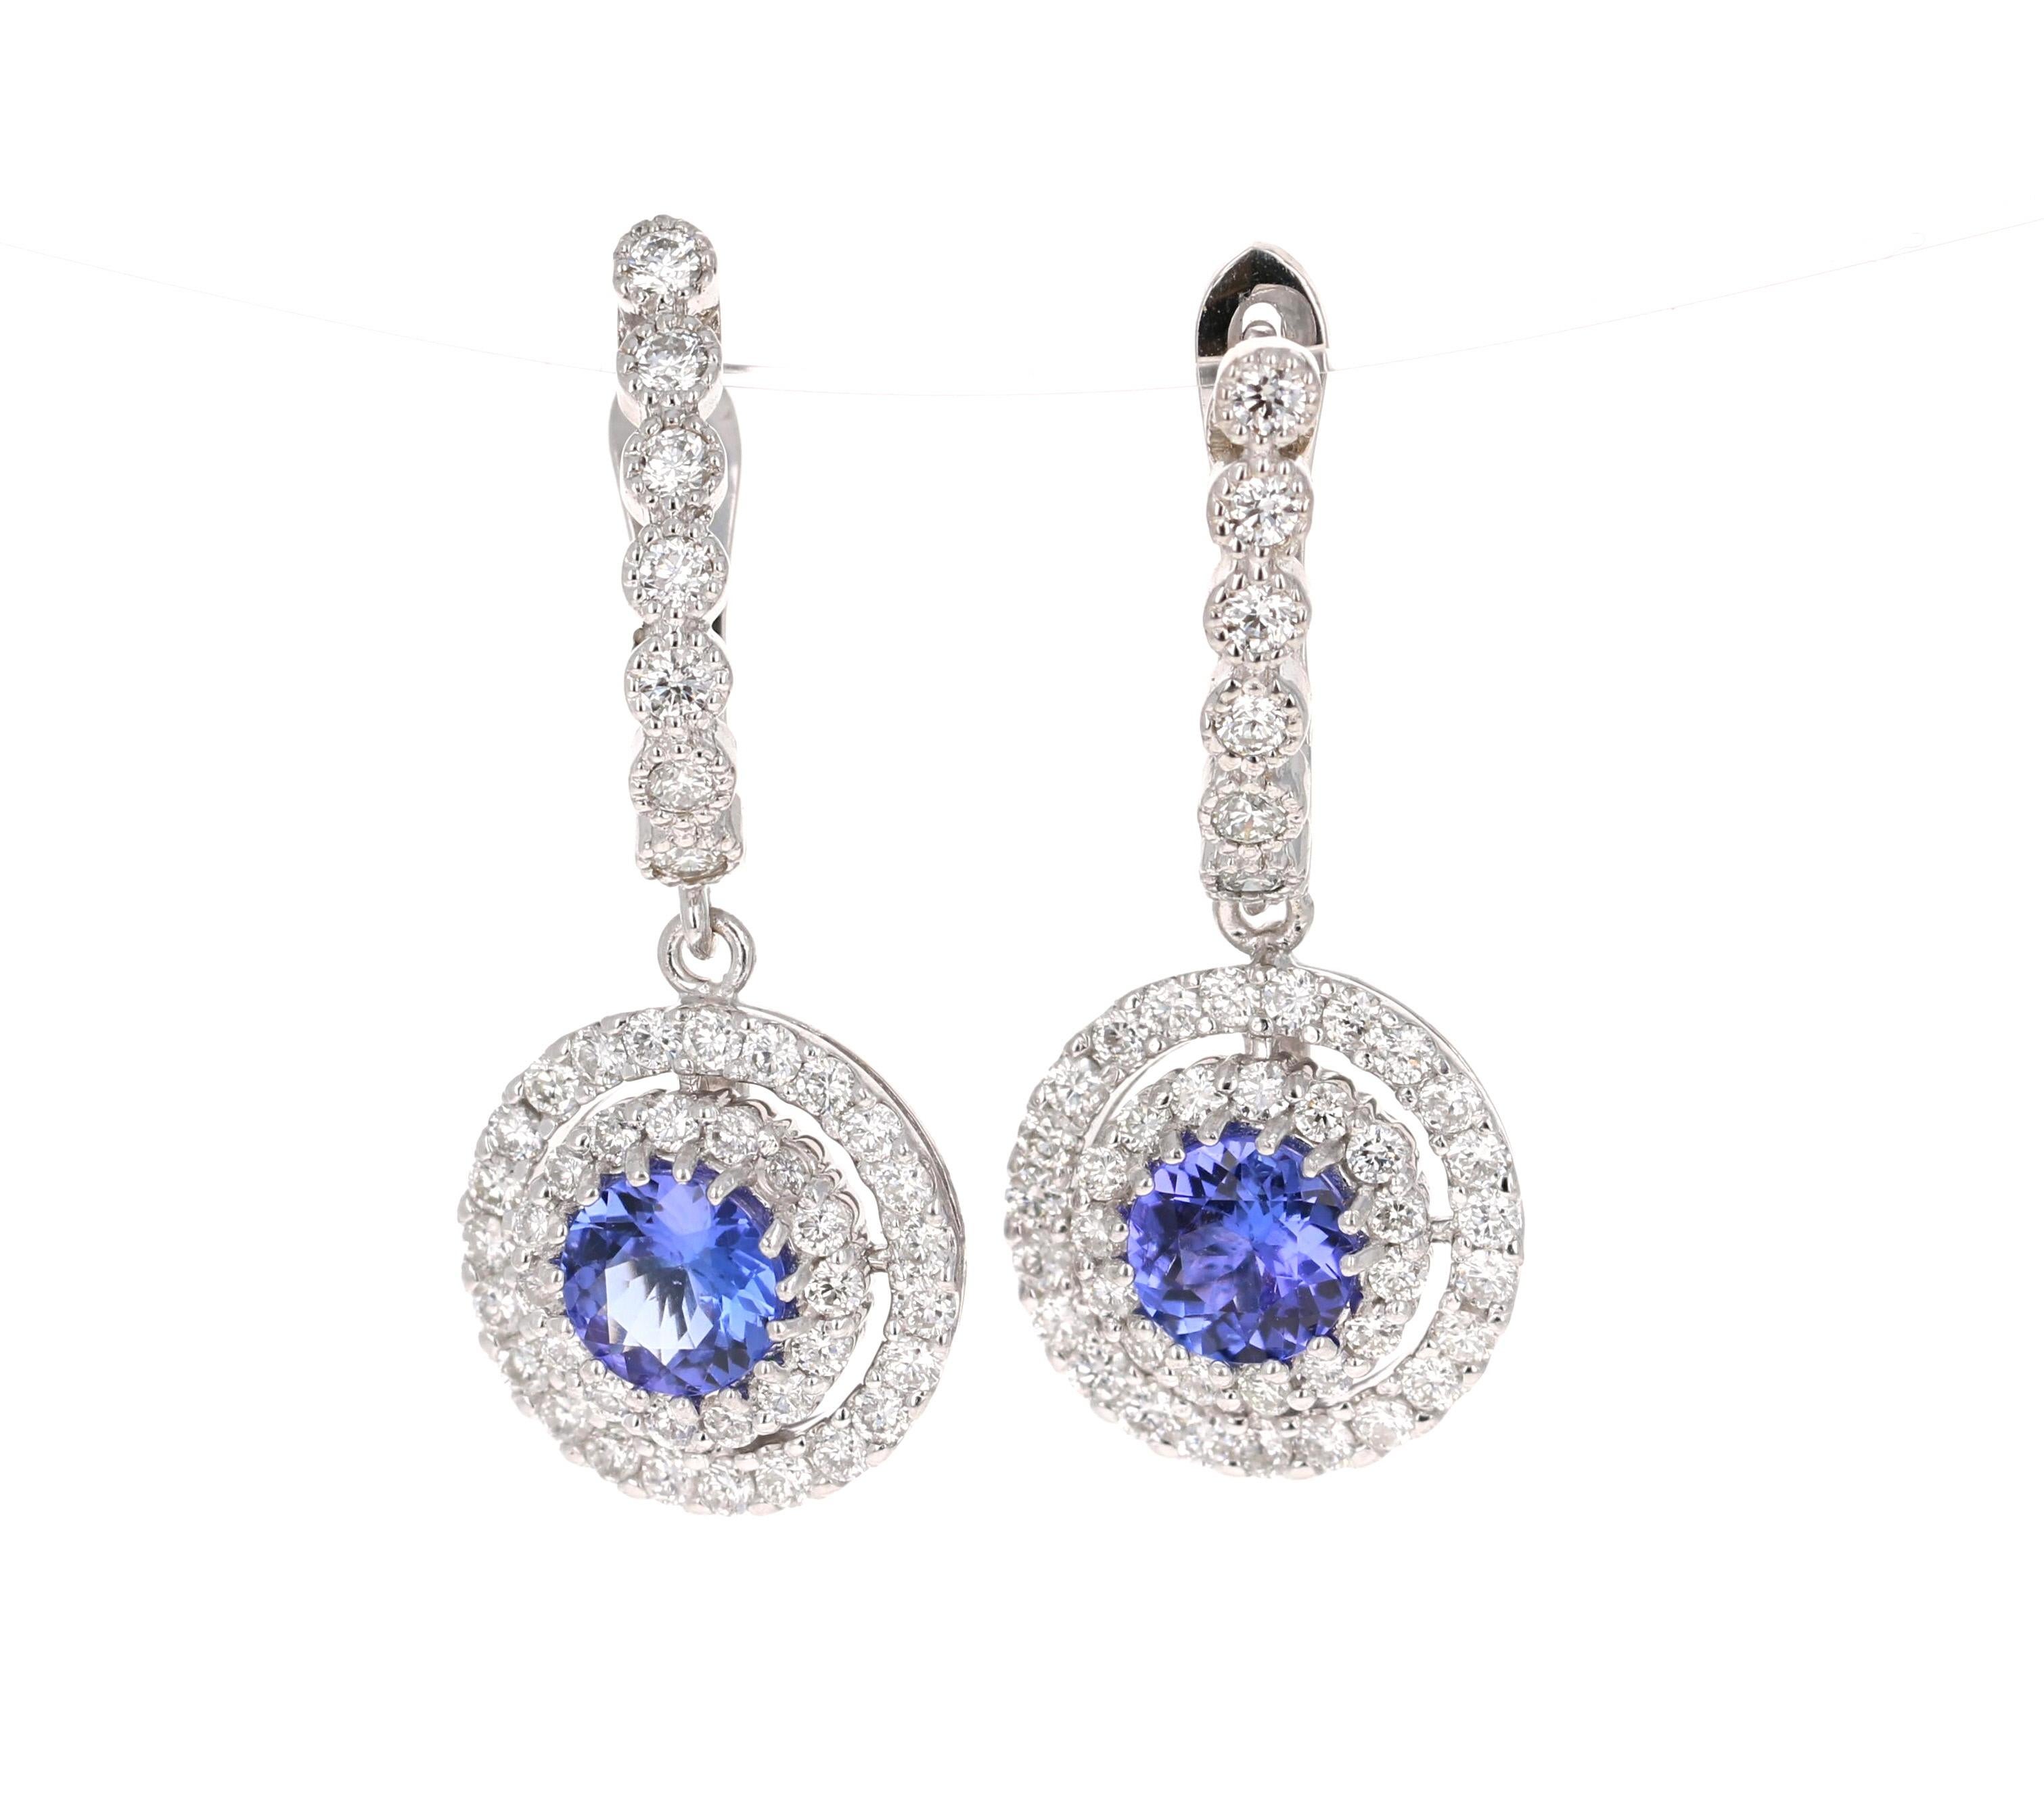 These beauties have 2 Round Cut Tanzanites that weigh 1.51 Carats and 91 Round Cut Diamonds that weigh 1.68 Carats. The total carat weight of the earrings are 3.19 Carats. (Clarity: VS2, Color: F)

They are curated in 14 Karat White Gold and weigh